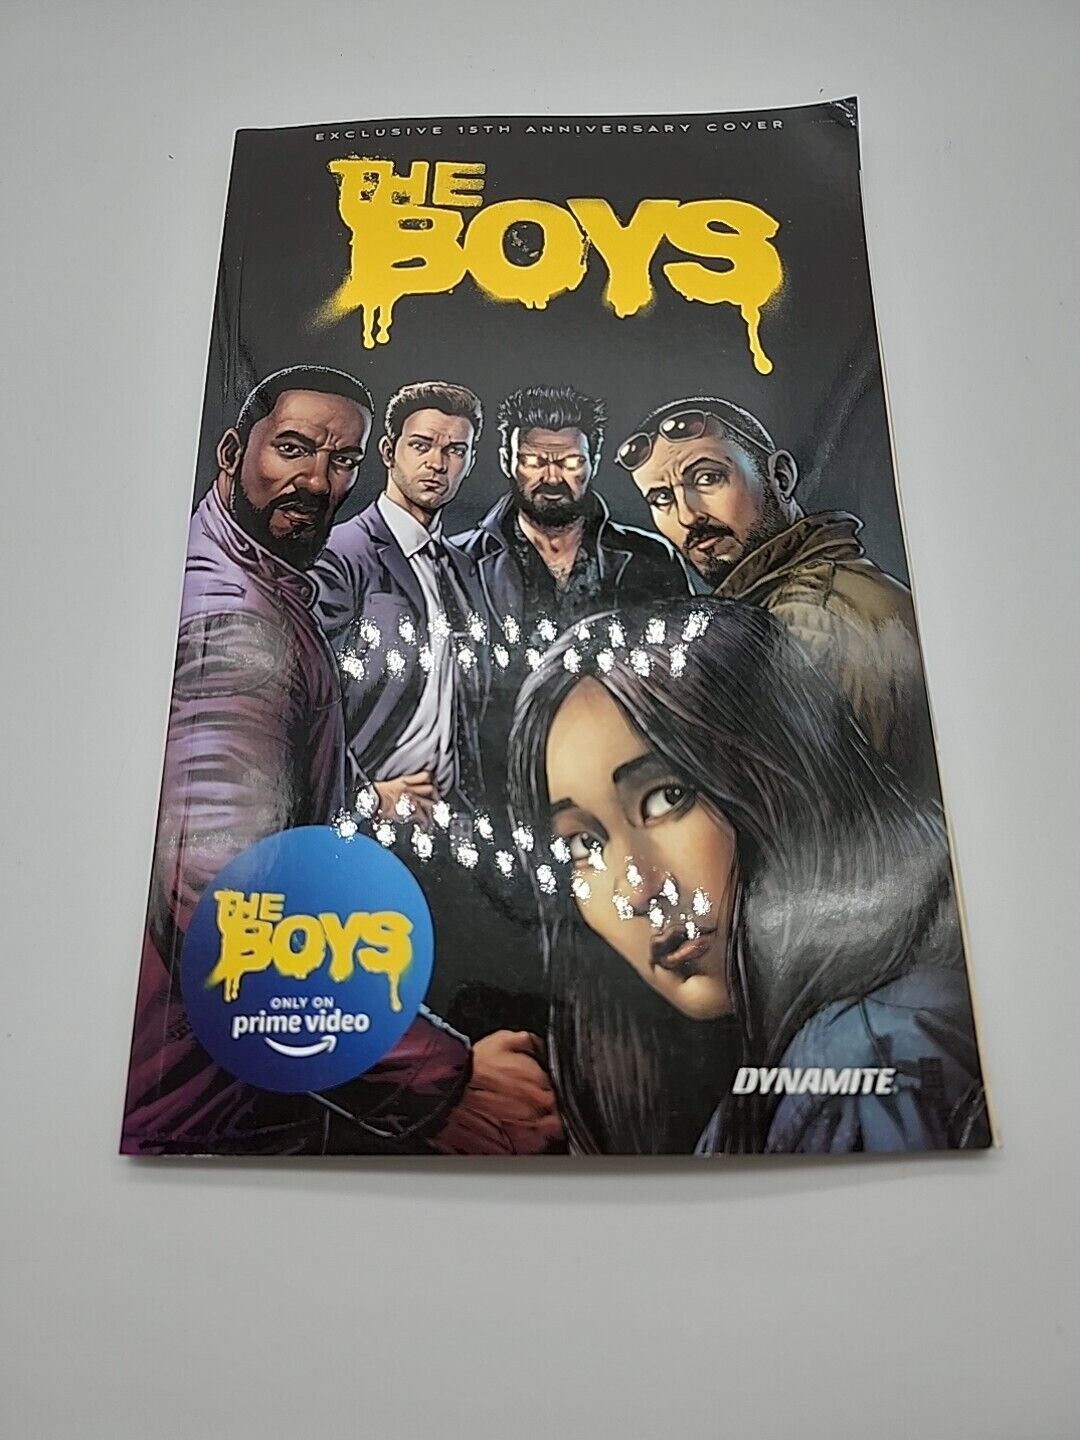 The Boys Vol. 1: The Name of the Game (Exclusive 15th Anniversary Cover)